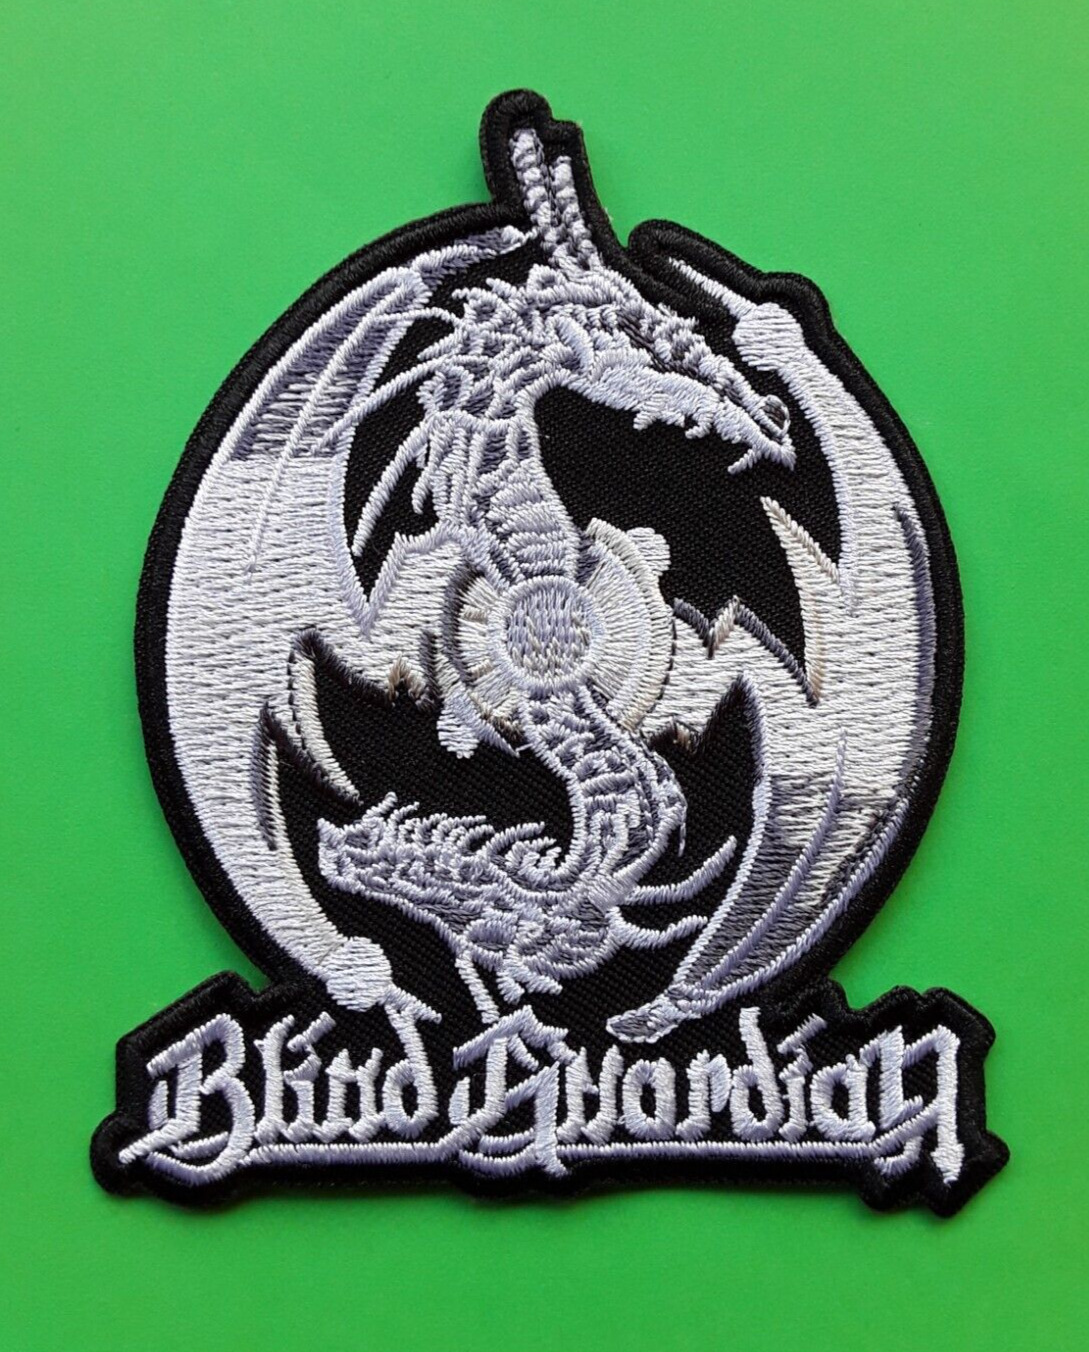 BLIND GUARDIAN IRON OR SEW ON QUALITY EMBROIDERED LARGE PATCH UK SELLER